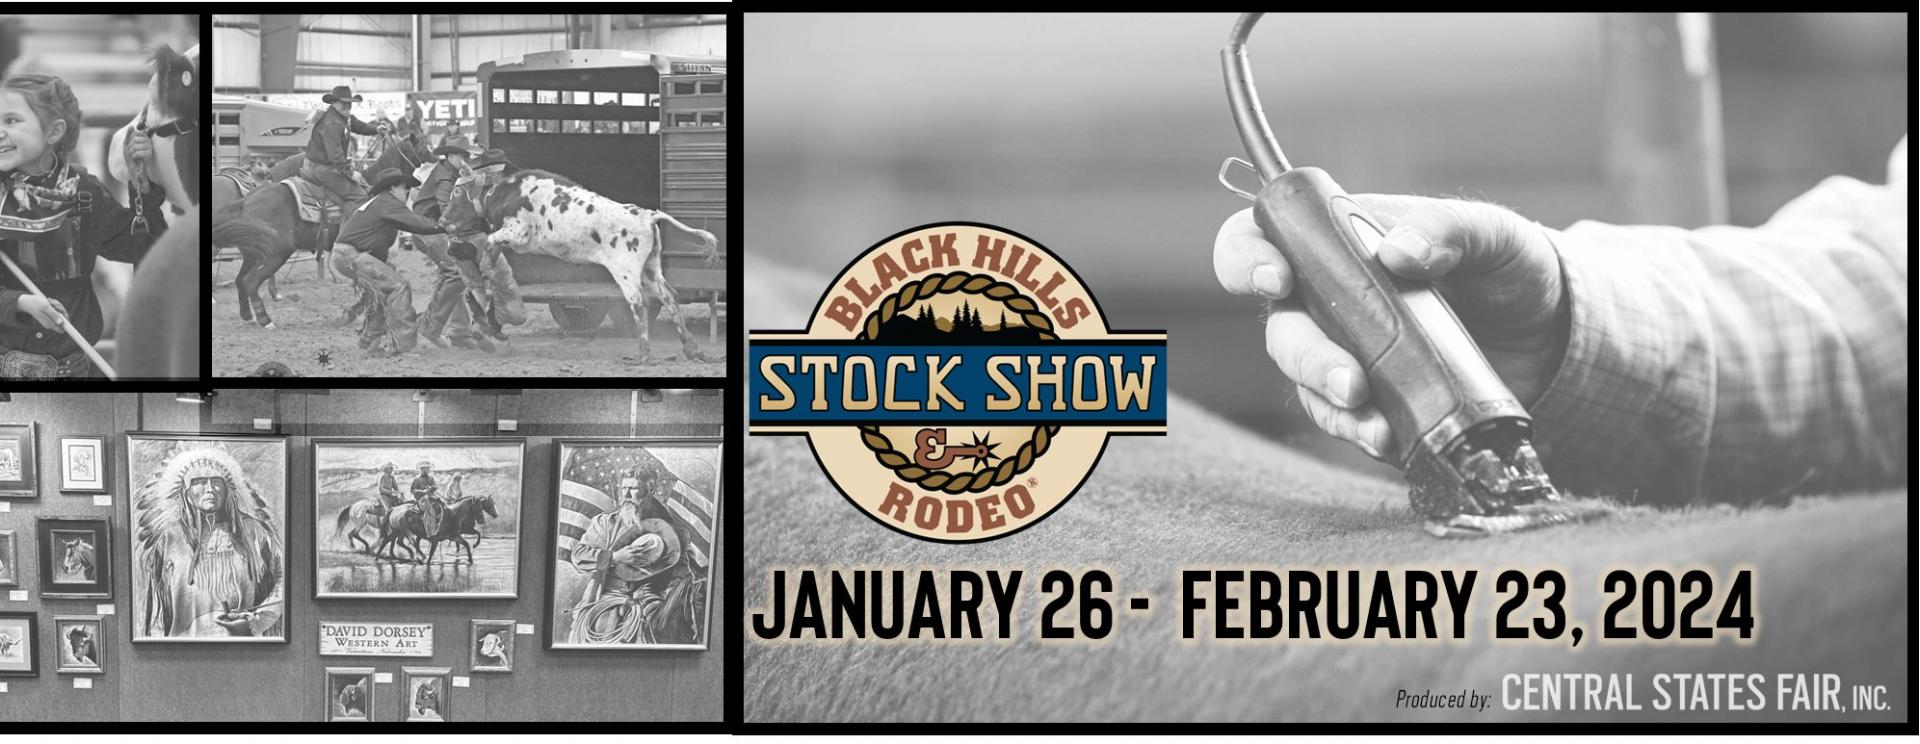 Black Hills Stock Show & Rodeo®